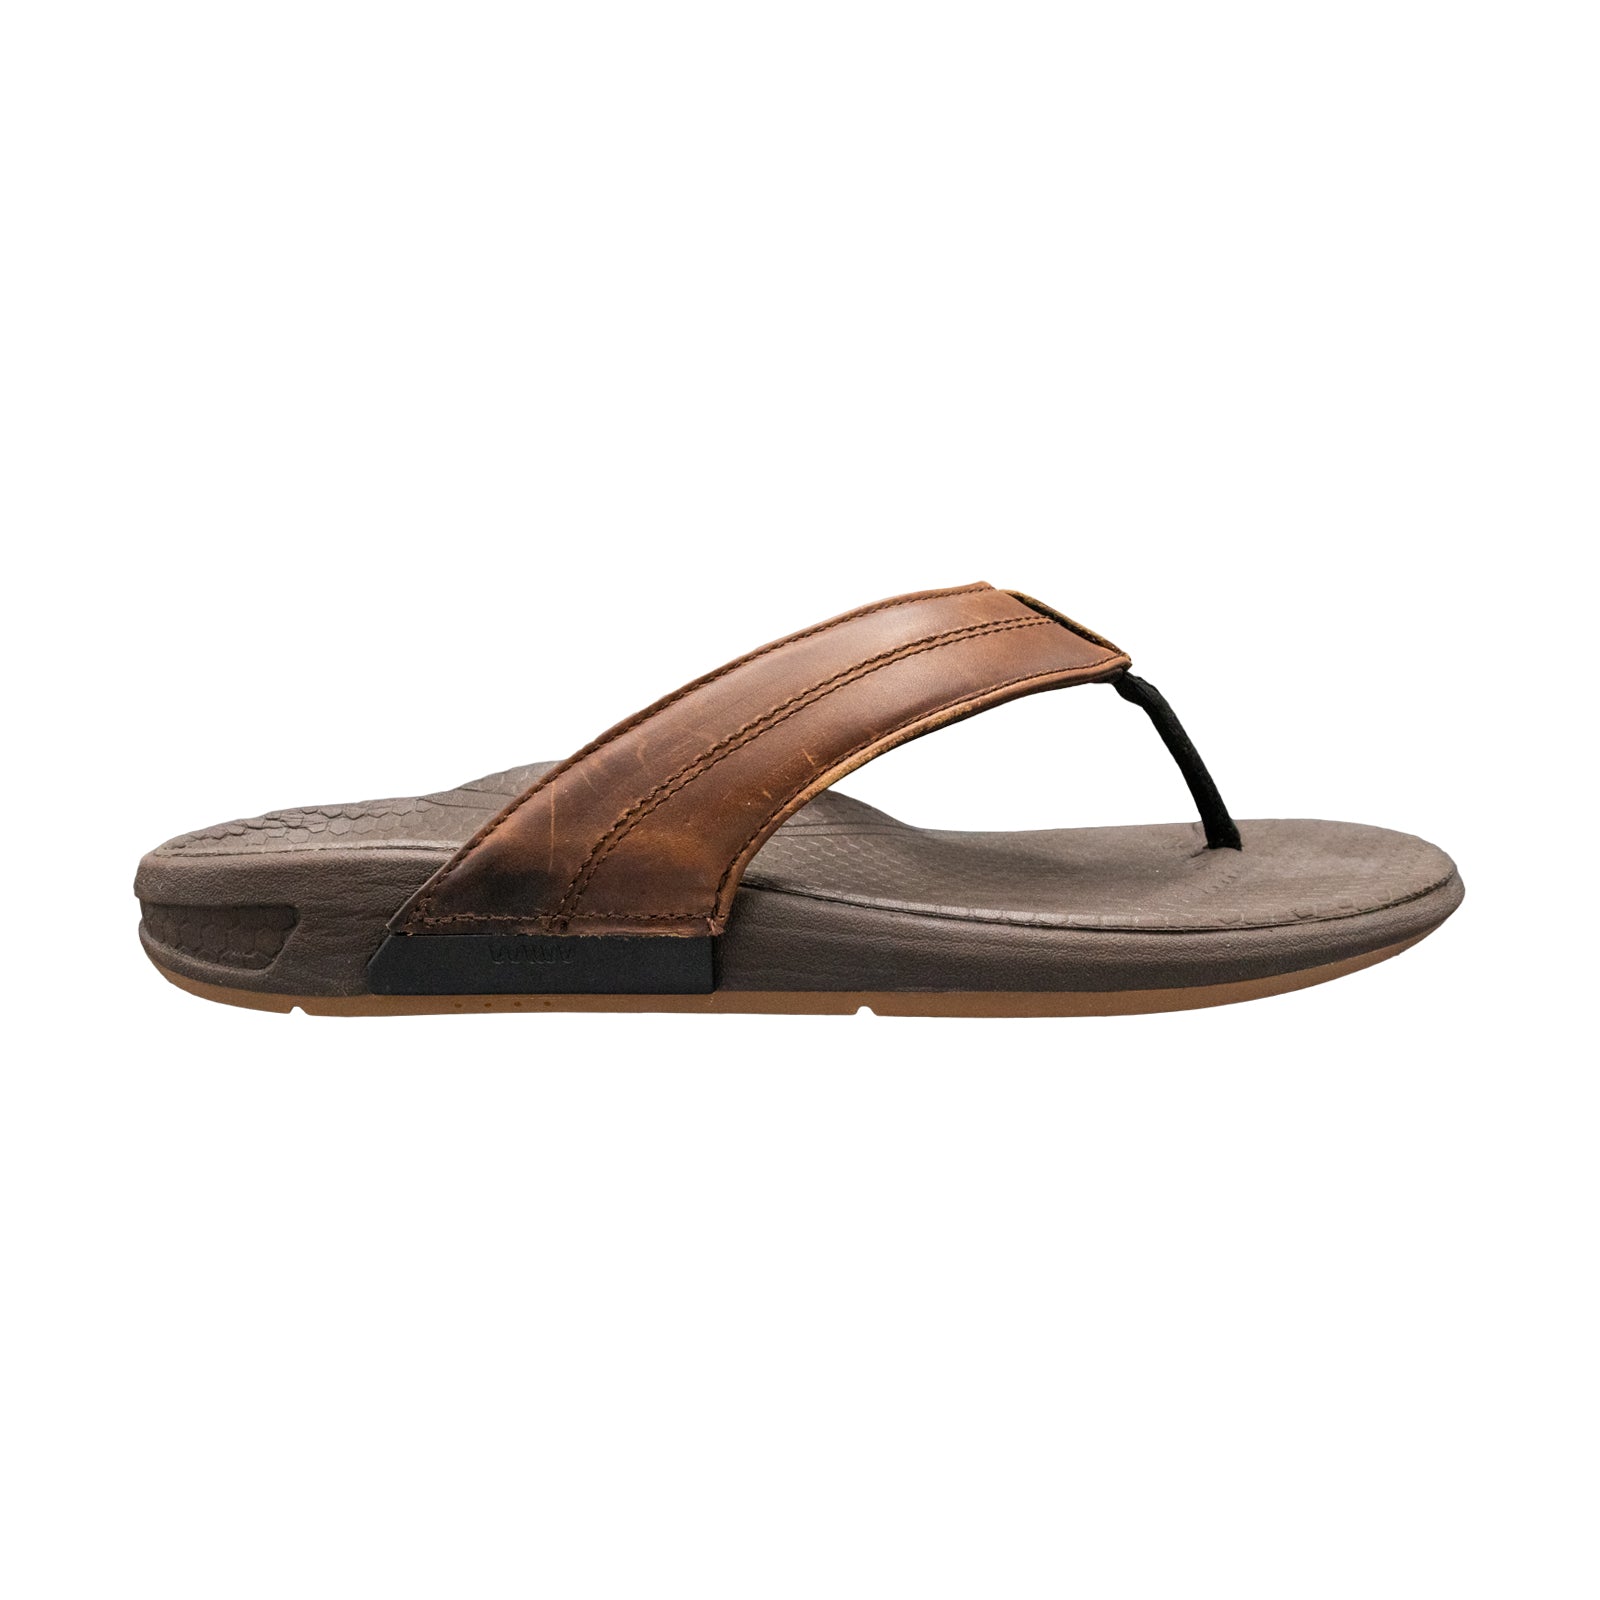 Men's Custom Arch Support Sandals - FitMyFoot